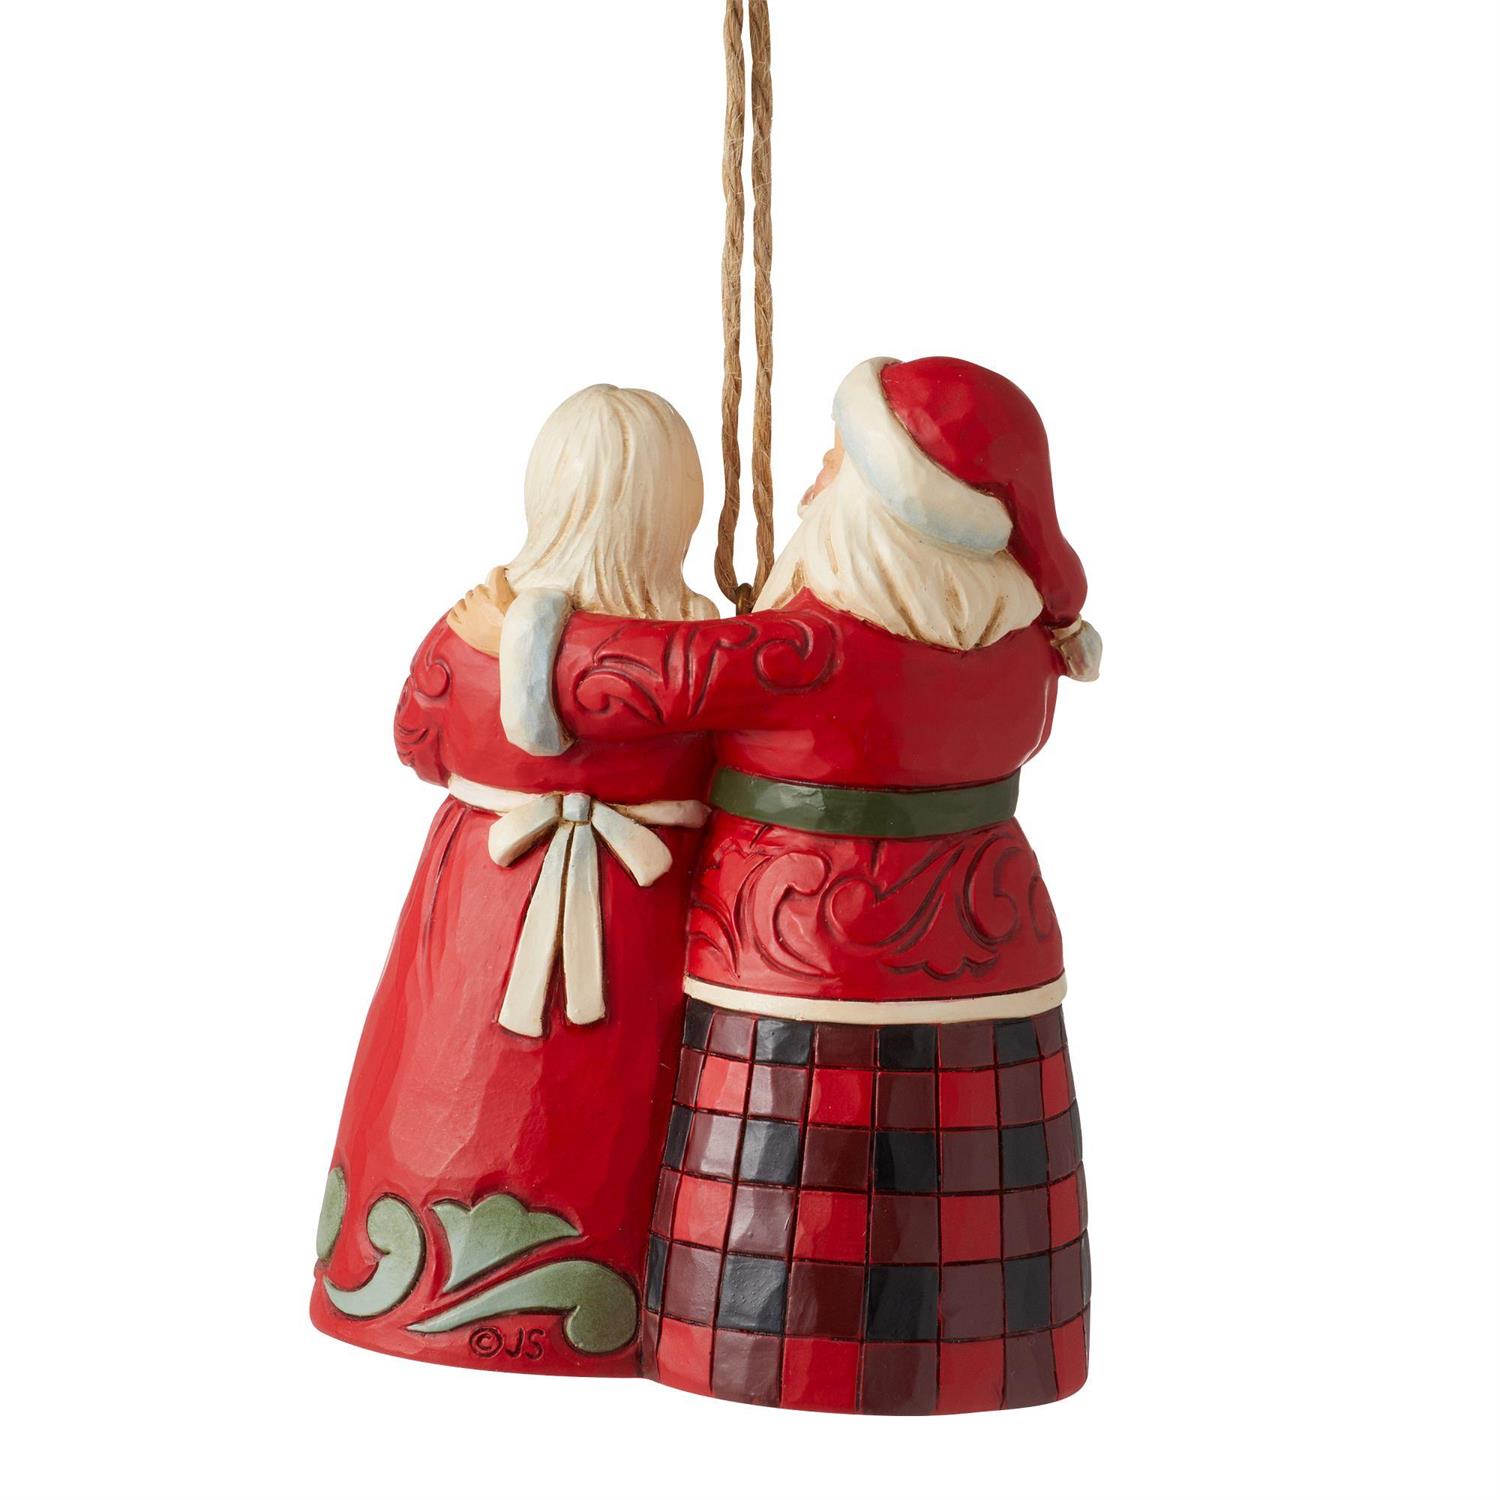 Enesco Gifts Jim Shore Heartwood Creek Highland Santa And Mrs Claus Ornament Free Shippping Iveys Gifts And Decor